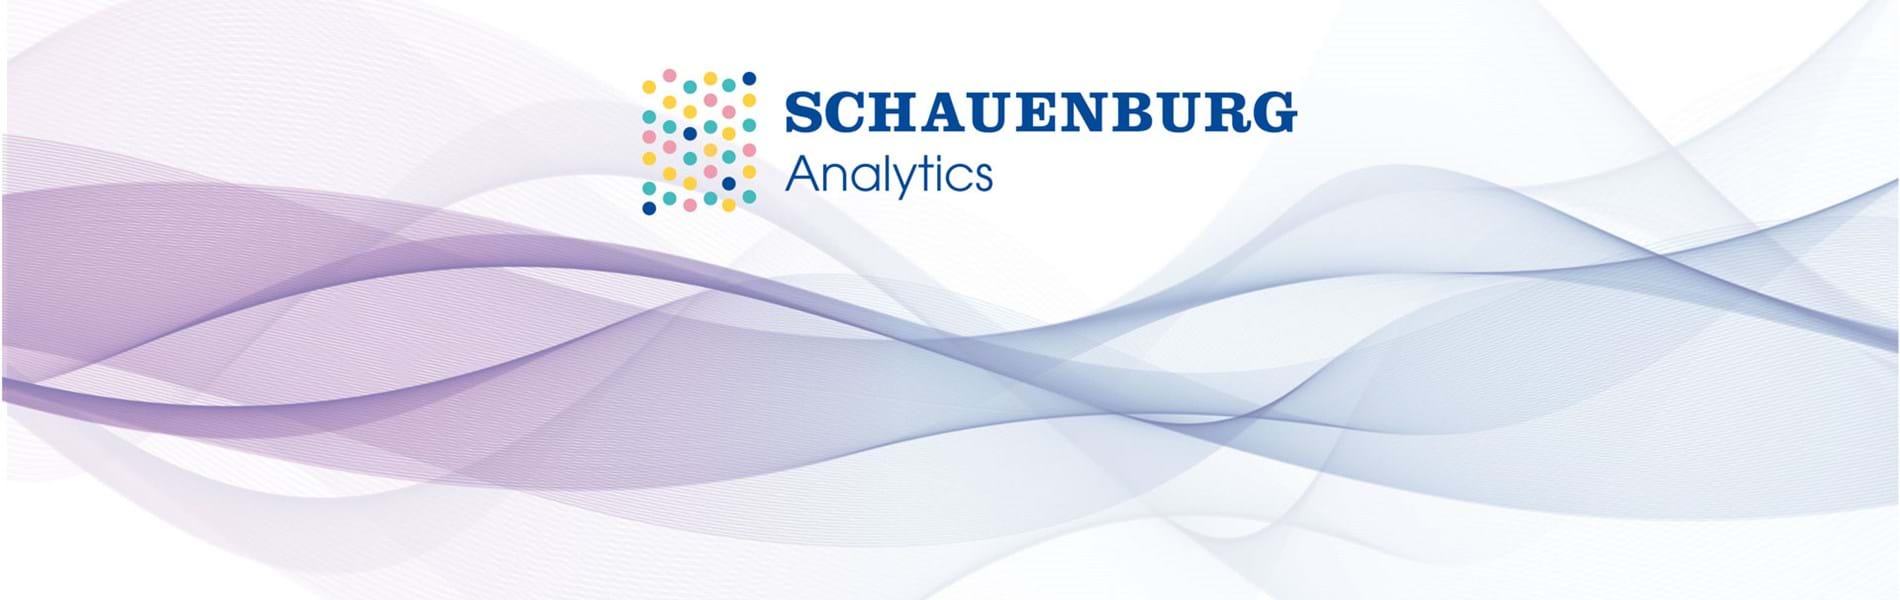 Markes and SepSolve are realigning under parent company Schauenburg Analytics